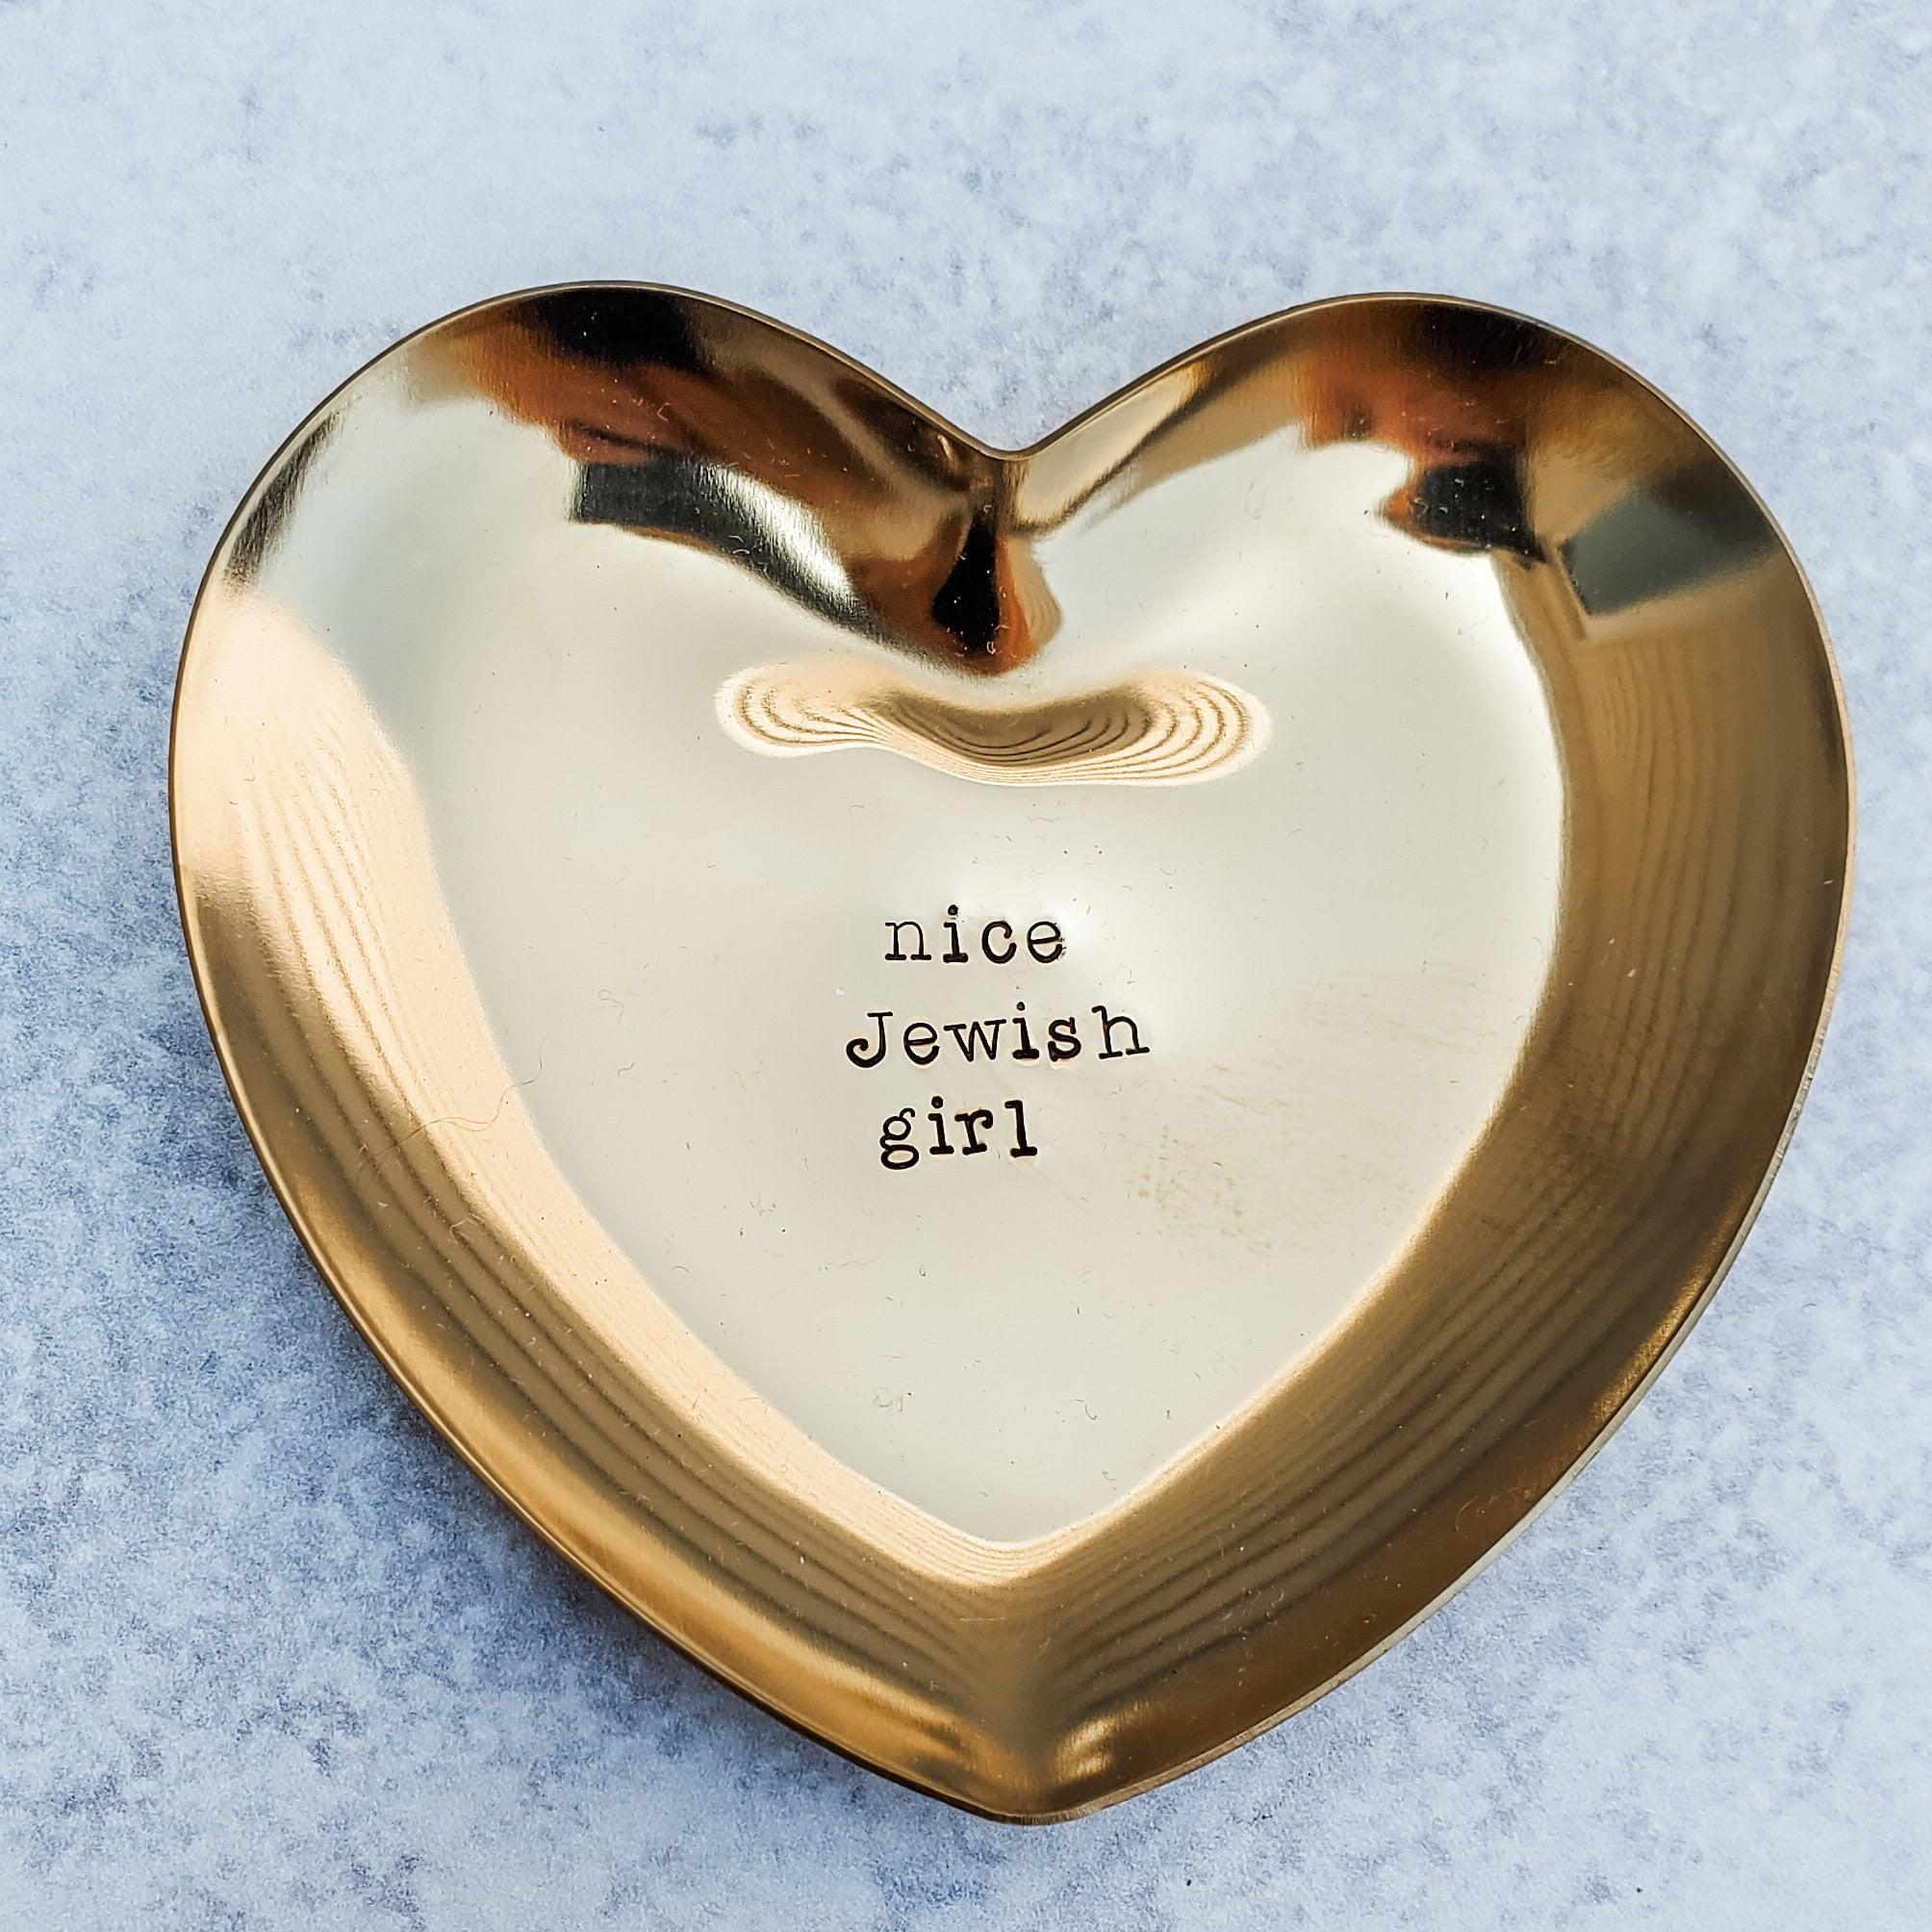 Nice Jewish Girl Trinket Dish - Heart Shaped Jewelry Holder for Her - Funny Hanukkah Gift for Young Adult - Present for Single Jewish Friend